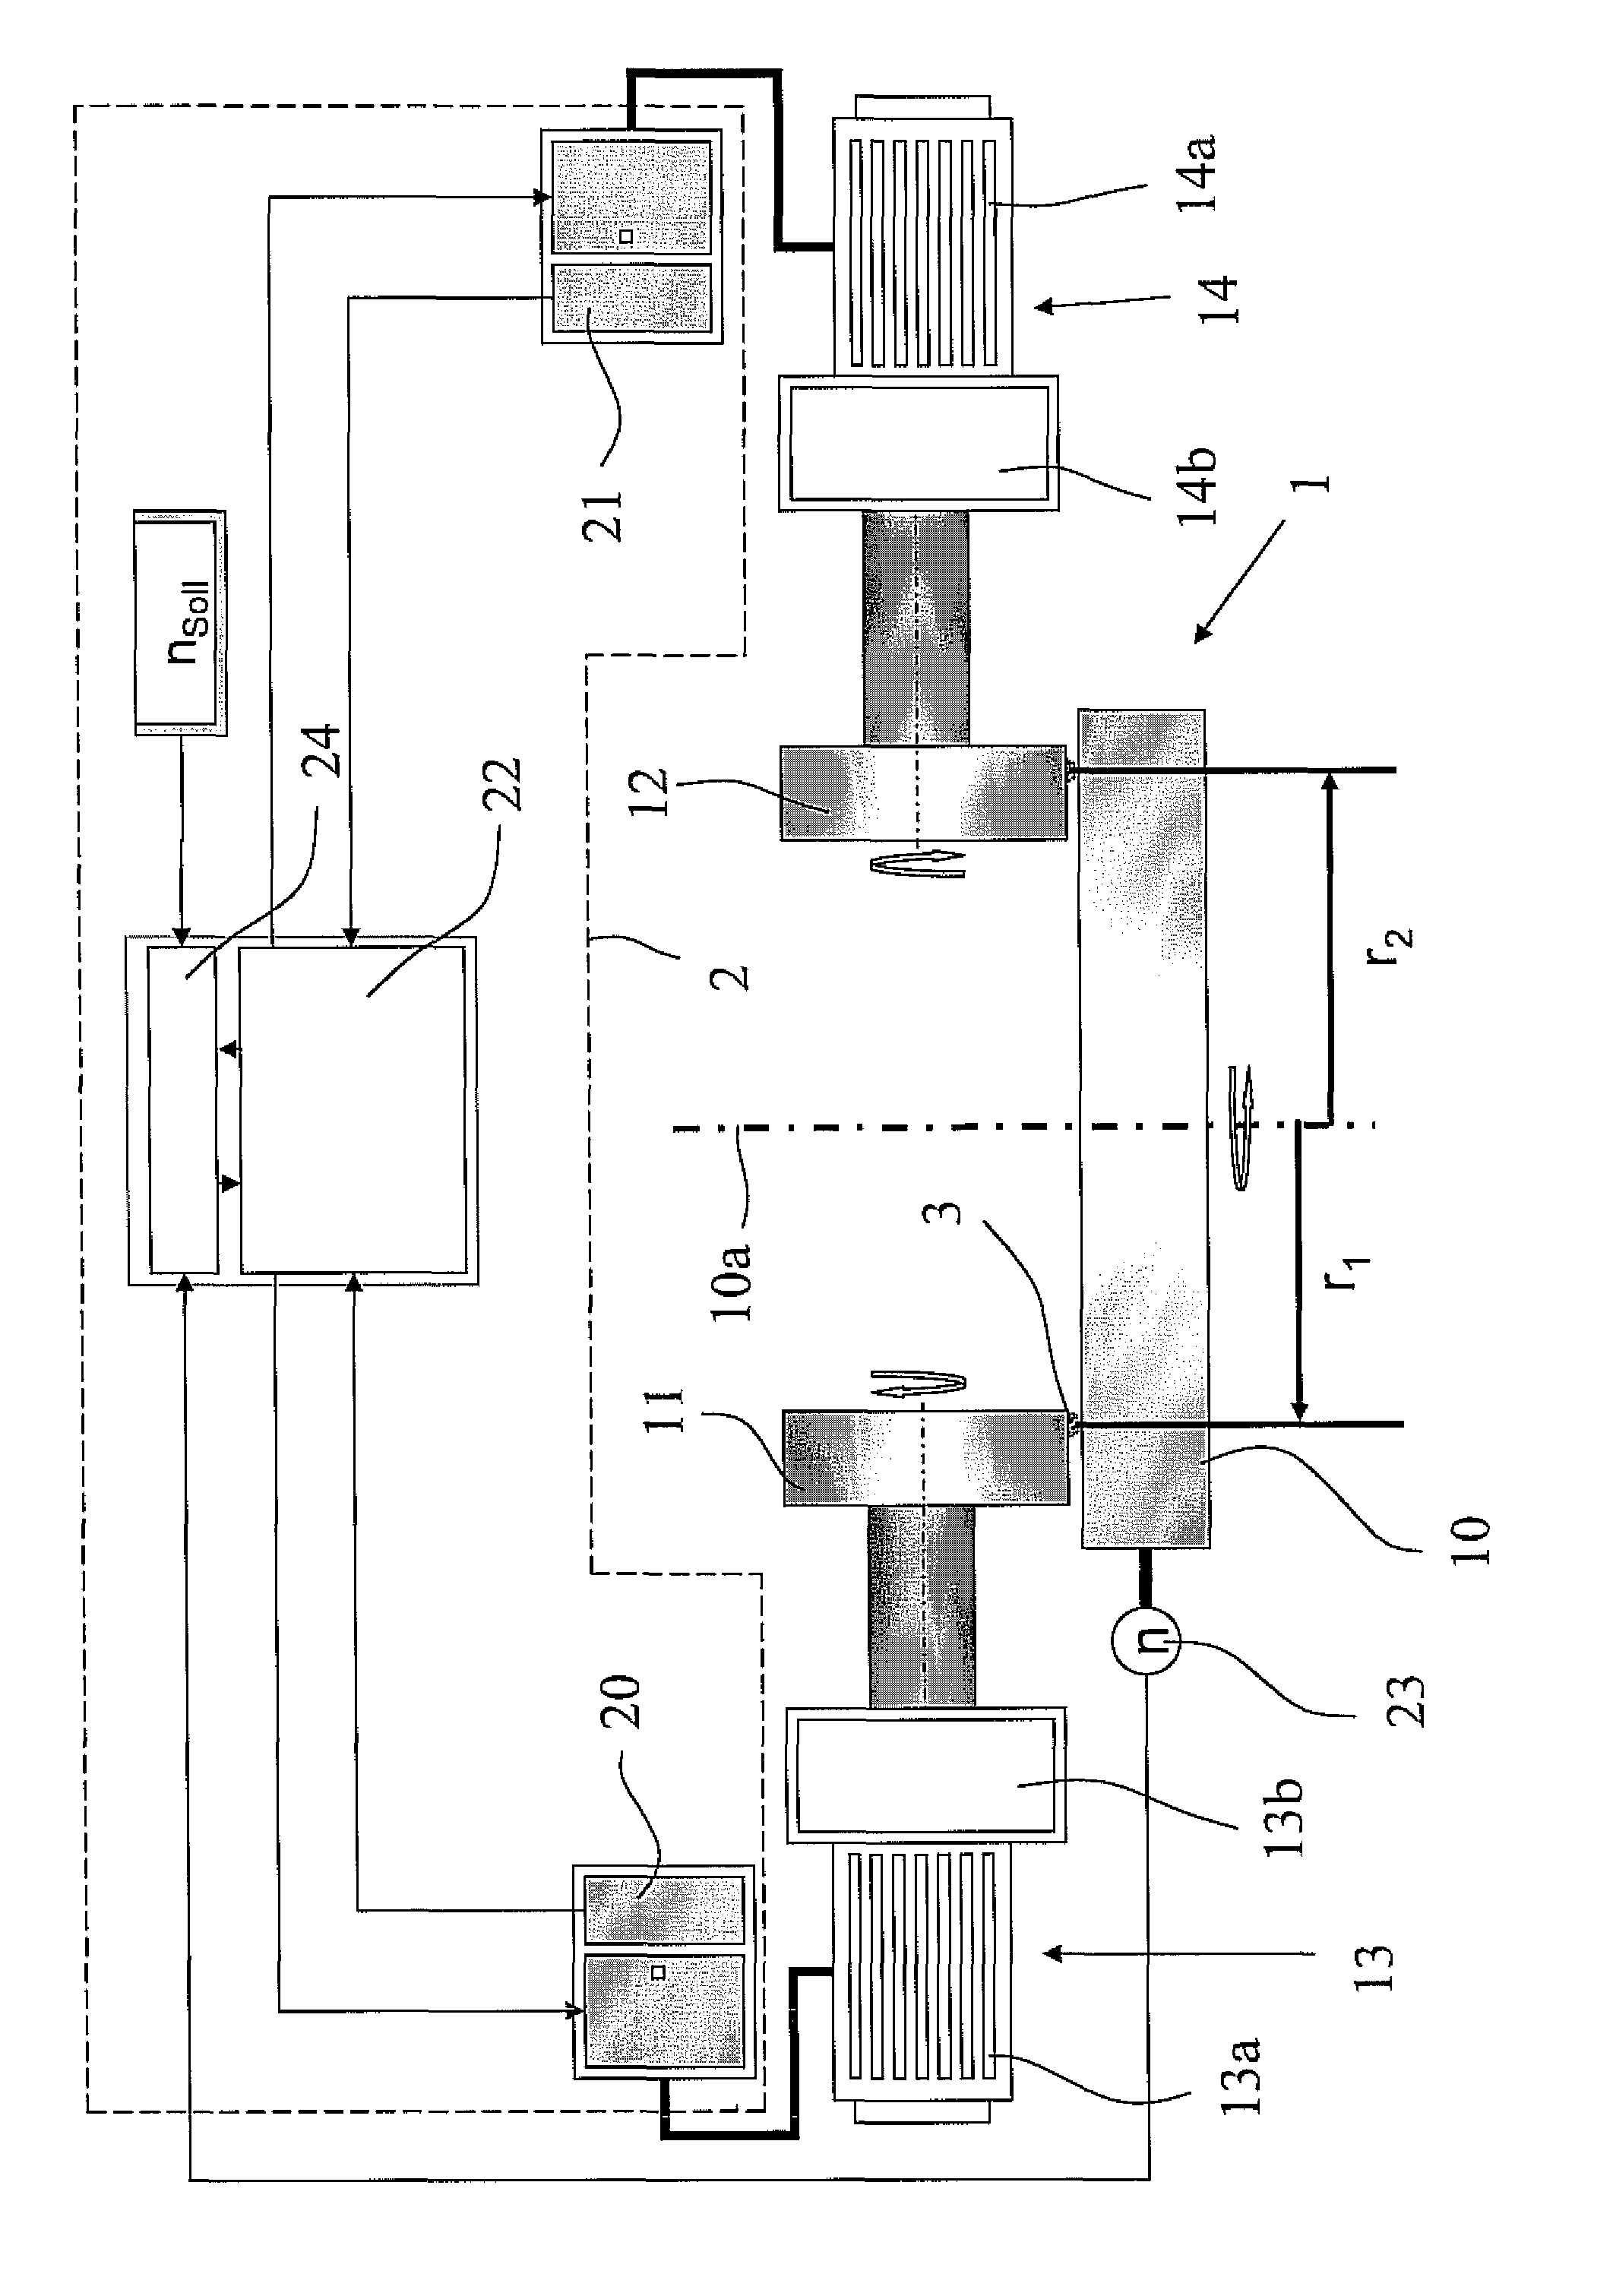 Method for comminuting material to be ground using a roller mill